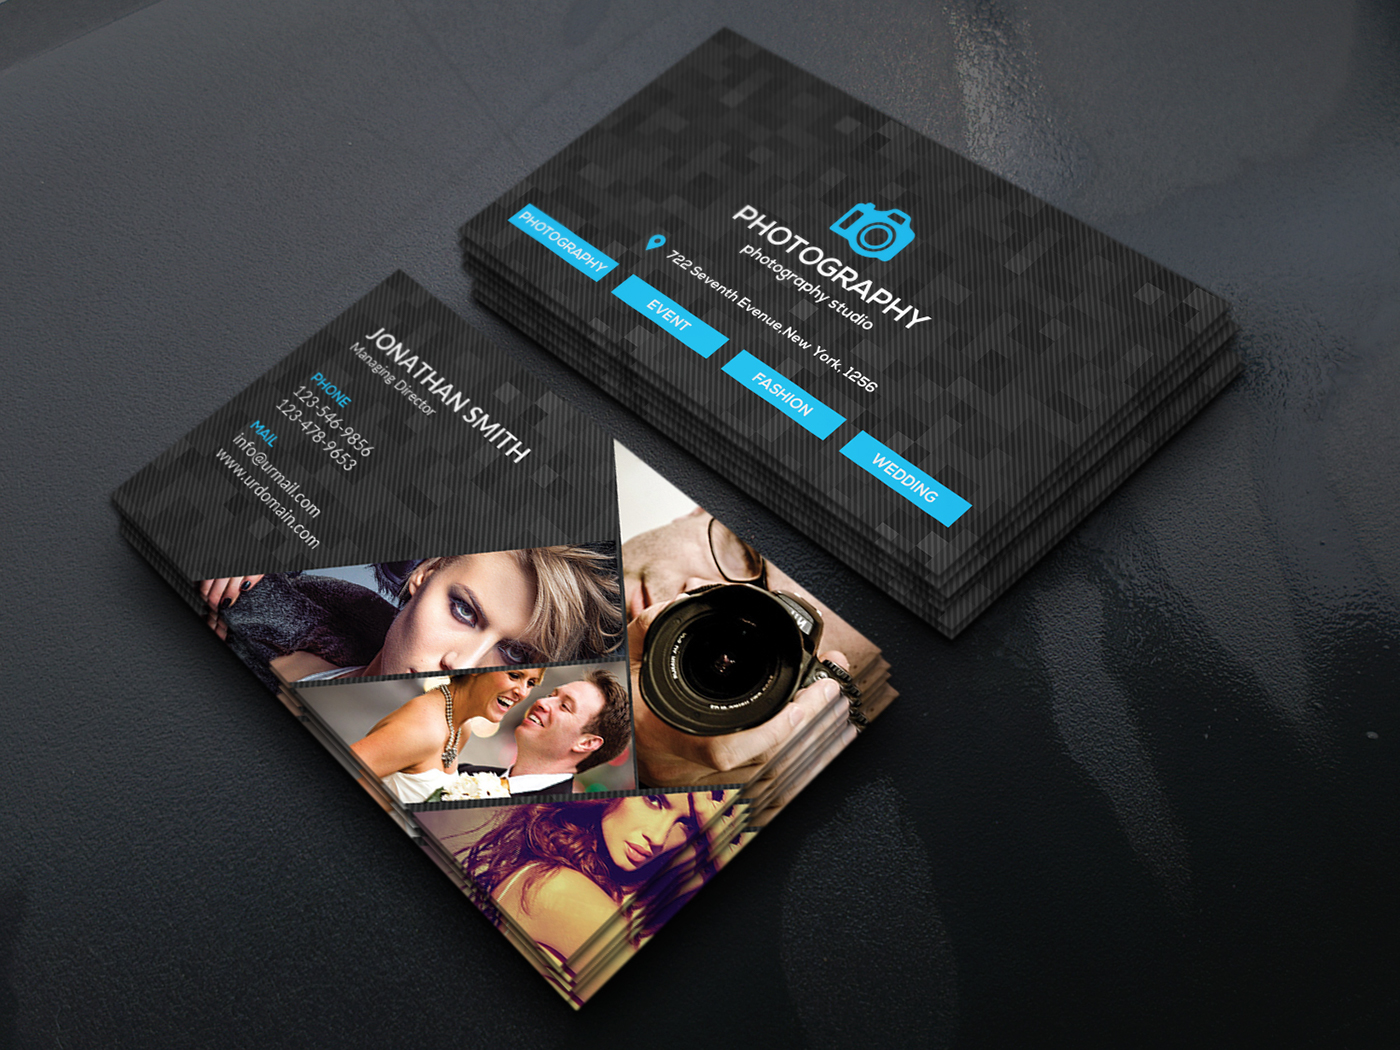 Free Photography Business Card. on Behance Intended For Photography Business Card Templates Free Download